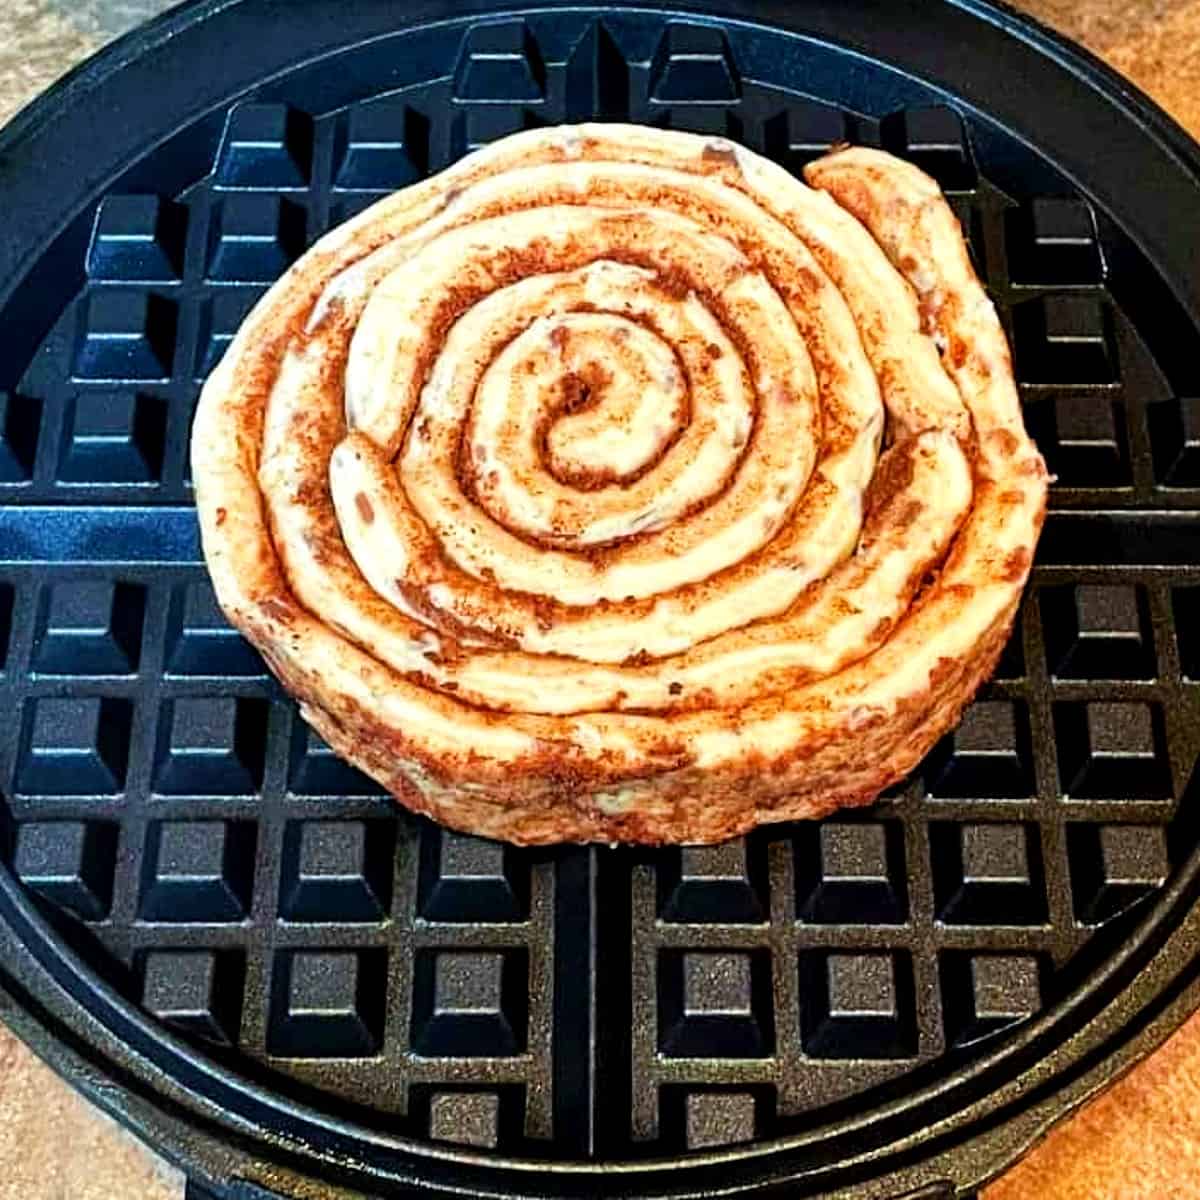 cinnamon-roll-in-a-waffle-maker-before-cooking